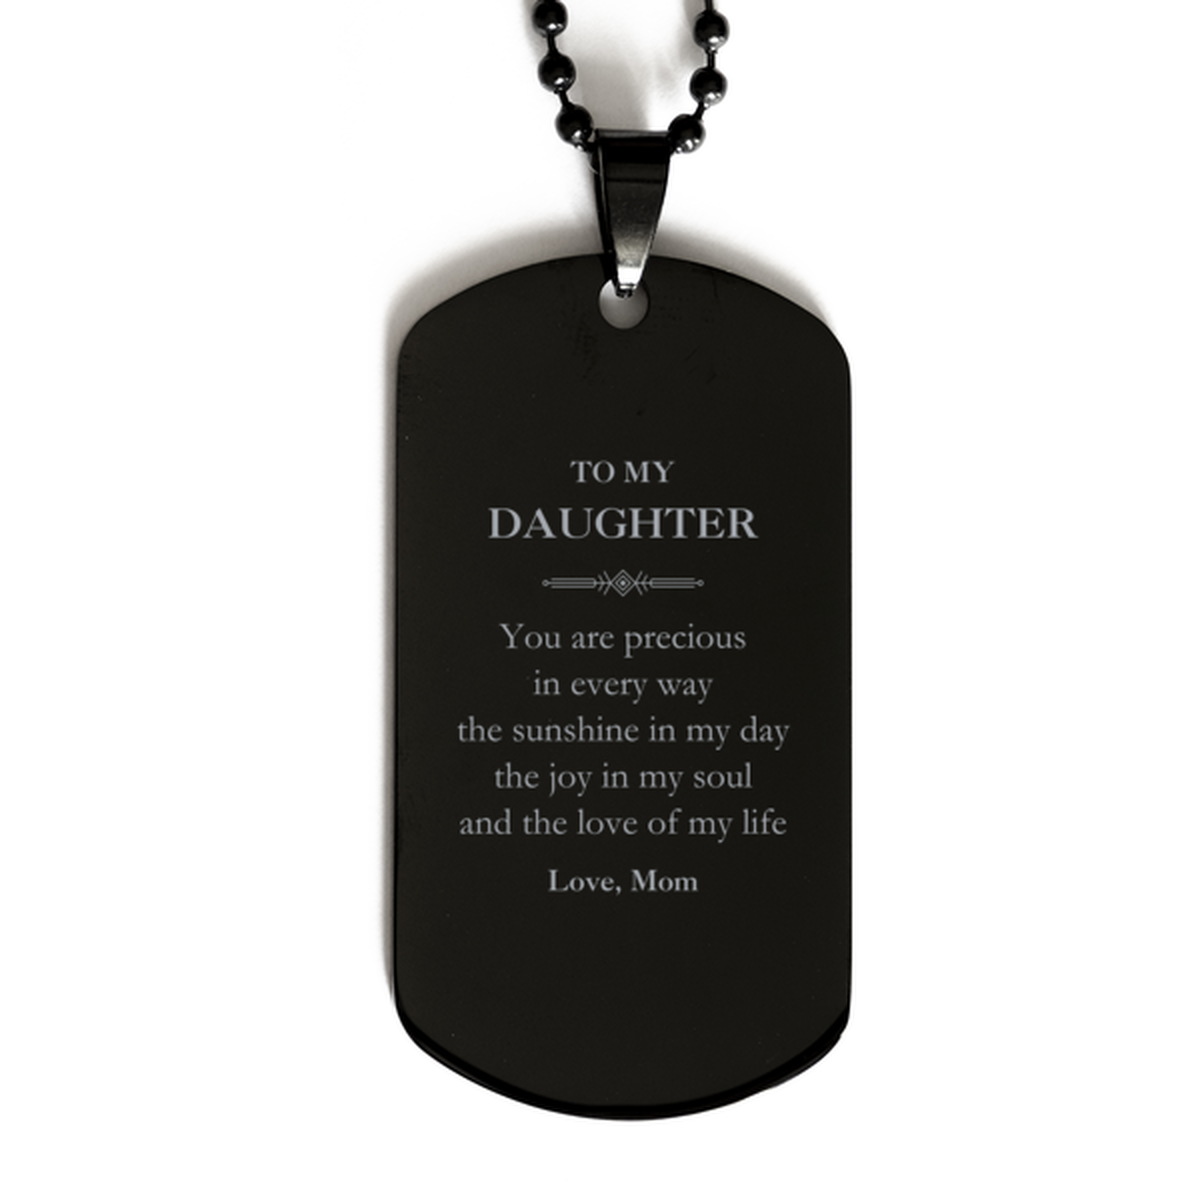 Graduation Gifts for Daughter Black Dog Tag Present from Mom, Christmas Daughter Birthday Gifts Daughter You are precious in every way the sunshine in my day. Love, Mom